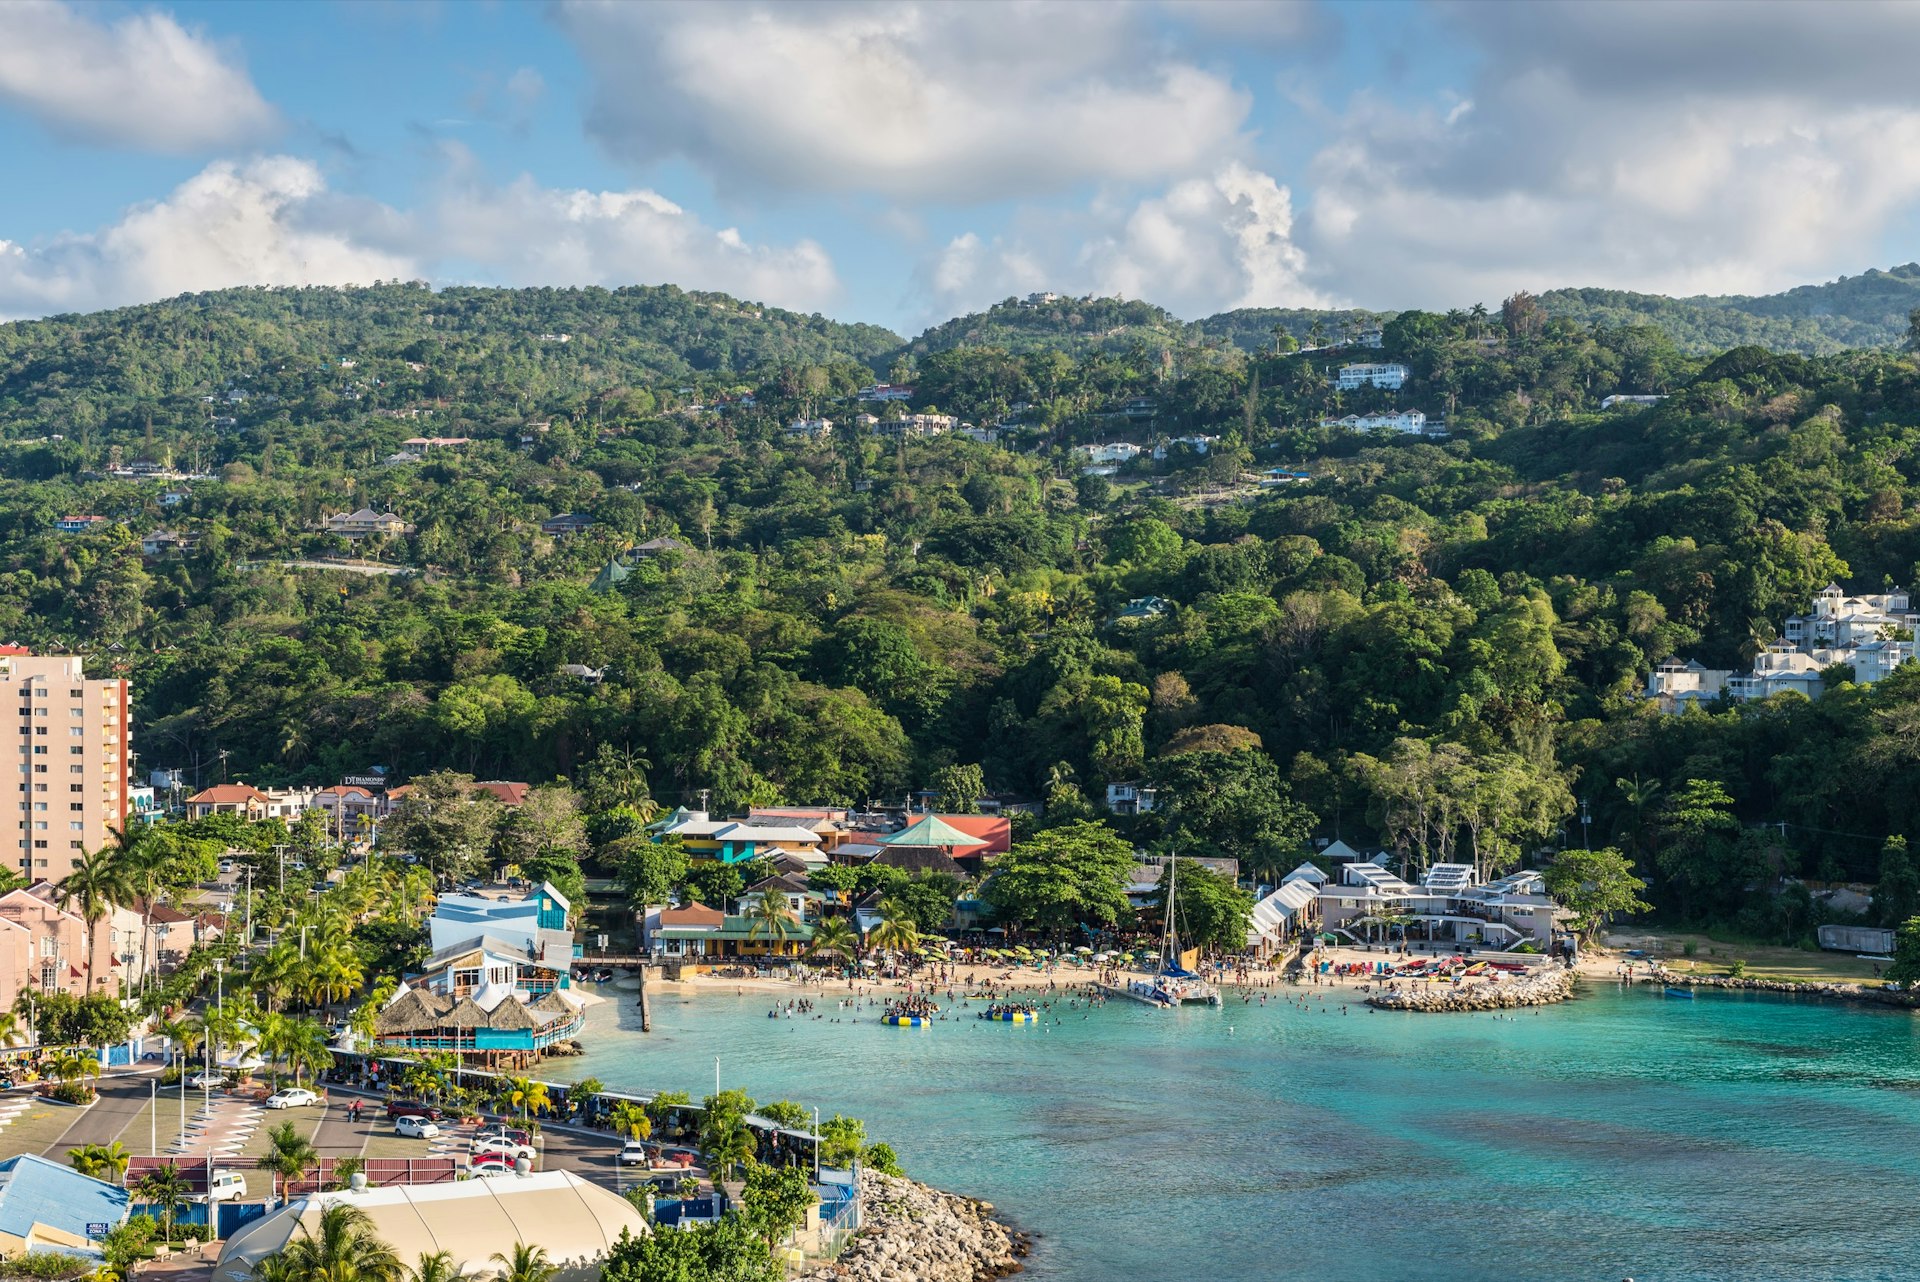 View from a ship of the blue waters of Fisherman's Beach in Ocho Rios, Jamaica. There are large groups of people are on the beach, there are large inflatable structures in the ocean and a sailboat docked in the shallow waters. 